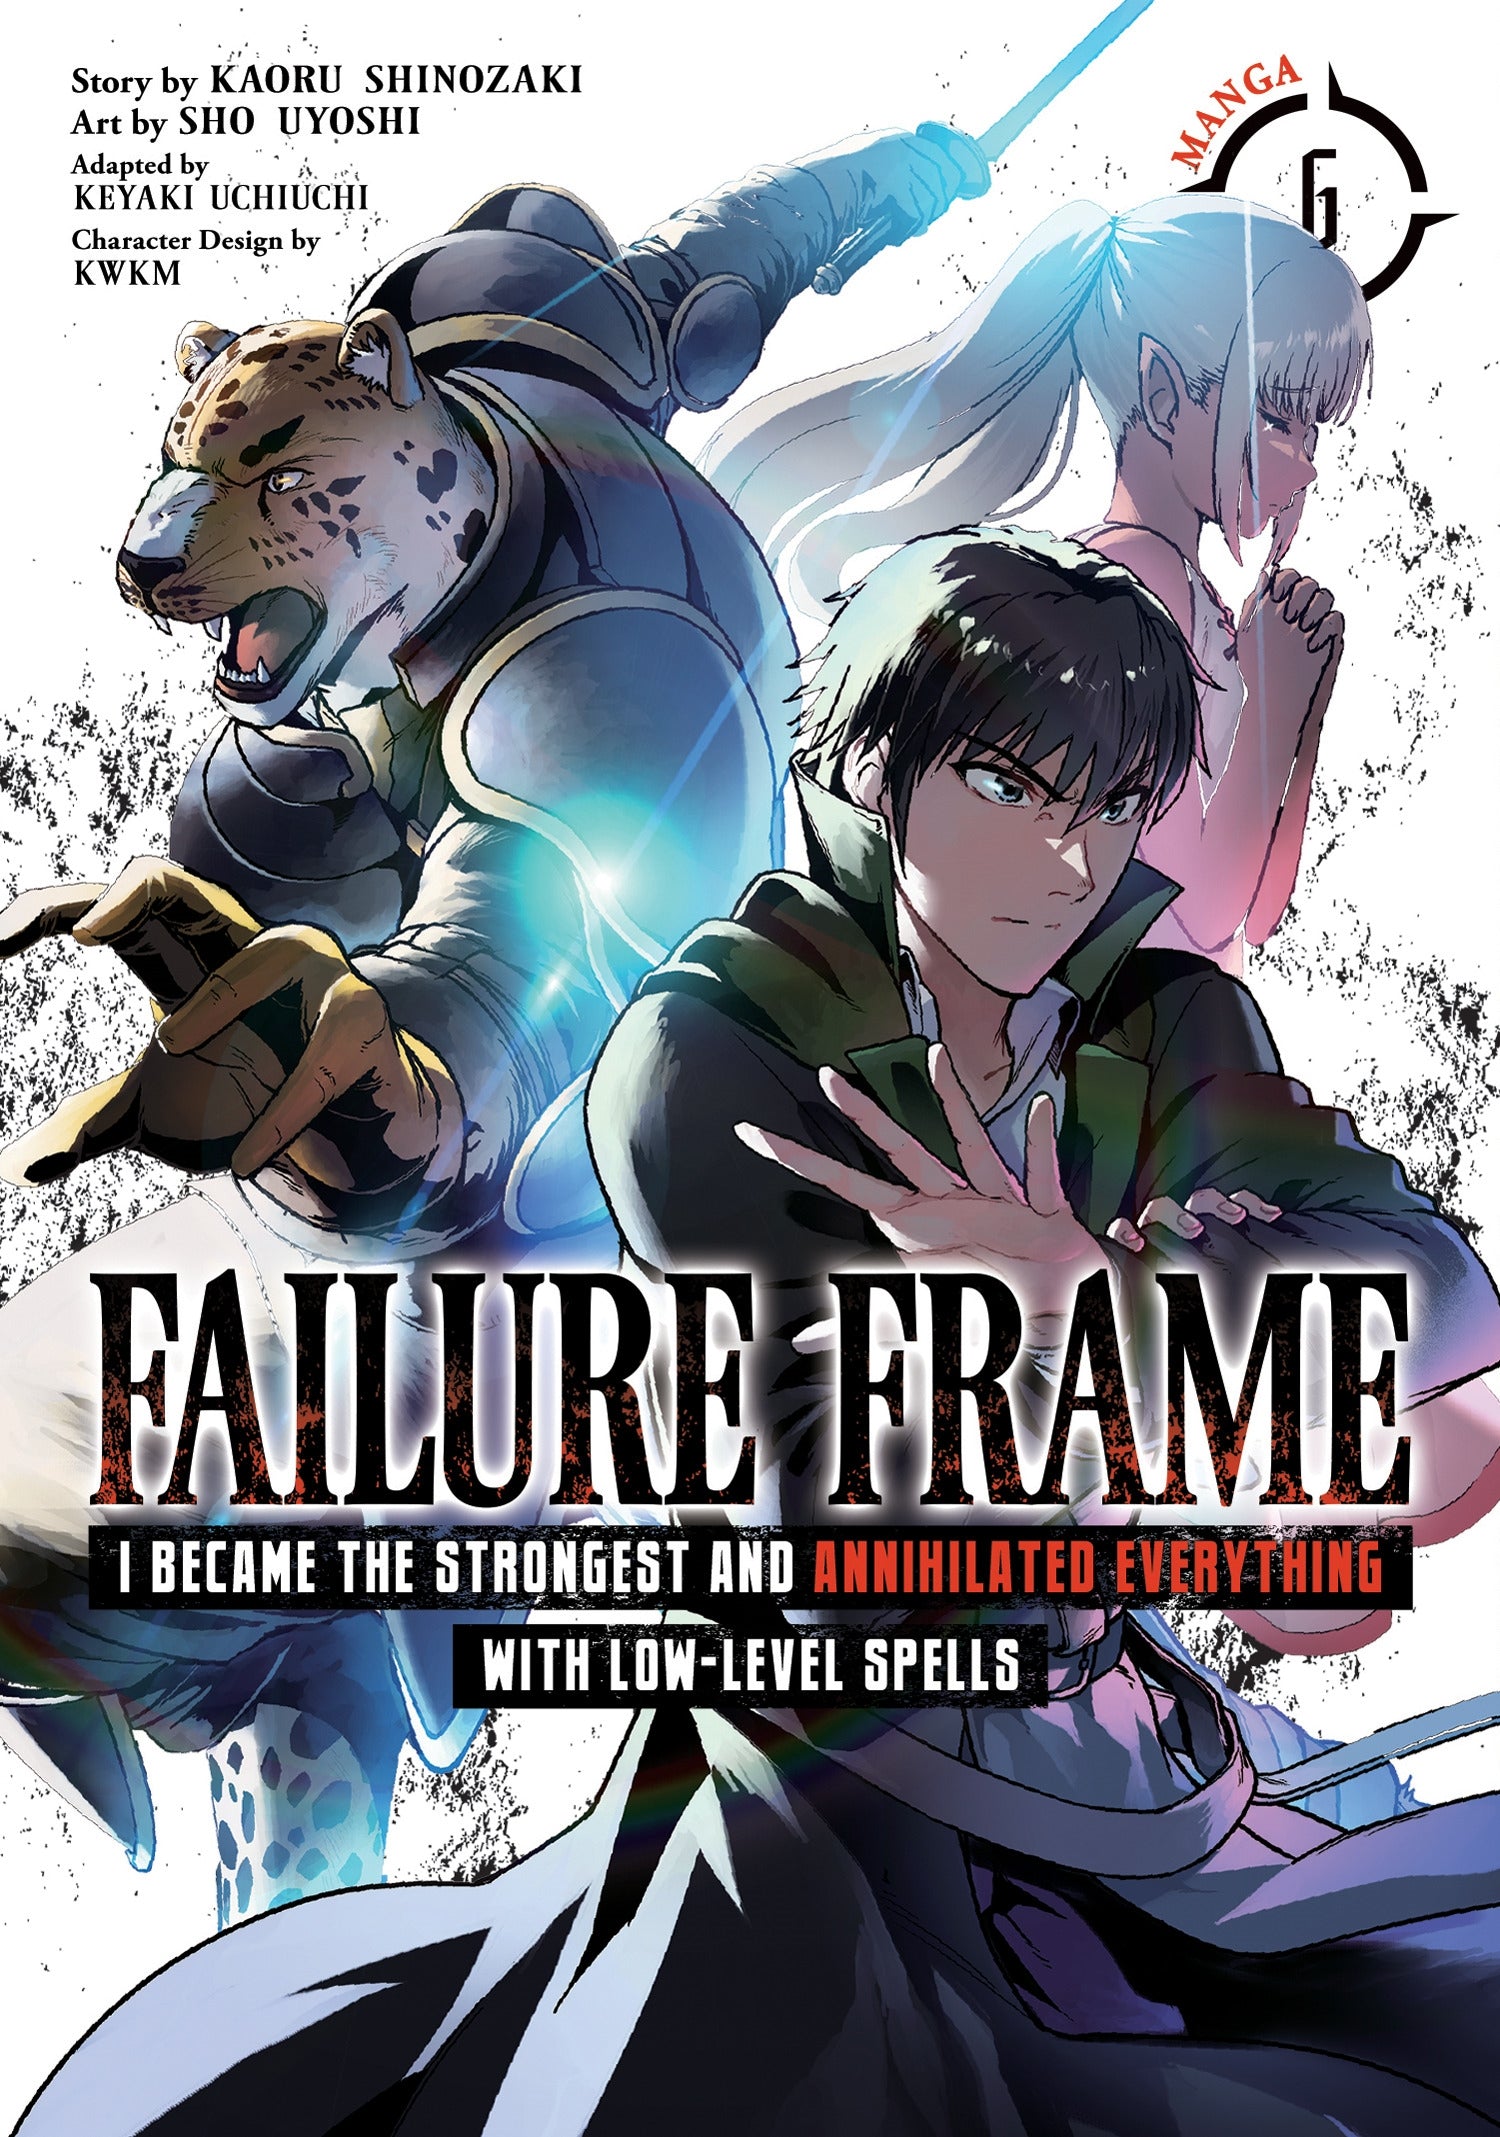 Failure Frame I Became the Strongest and Annihilated Everything With Low-Level Spells (Manga) Vol. 6